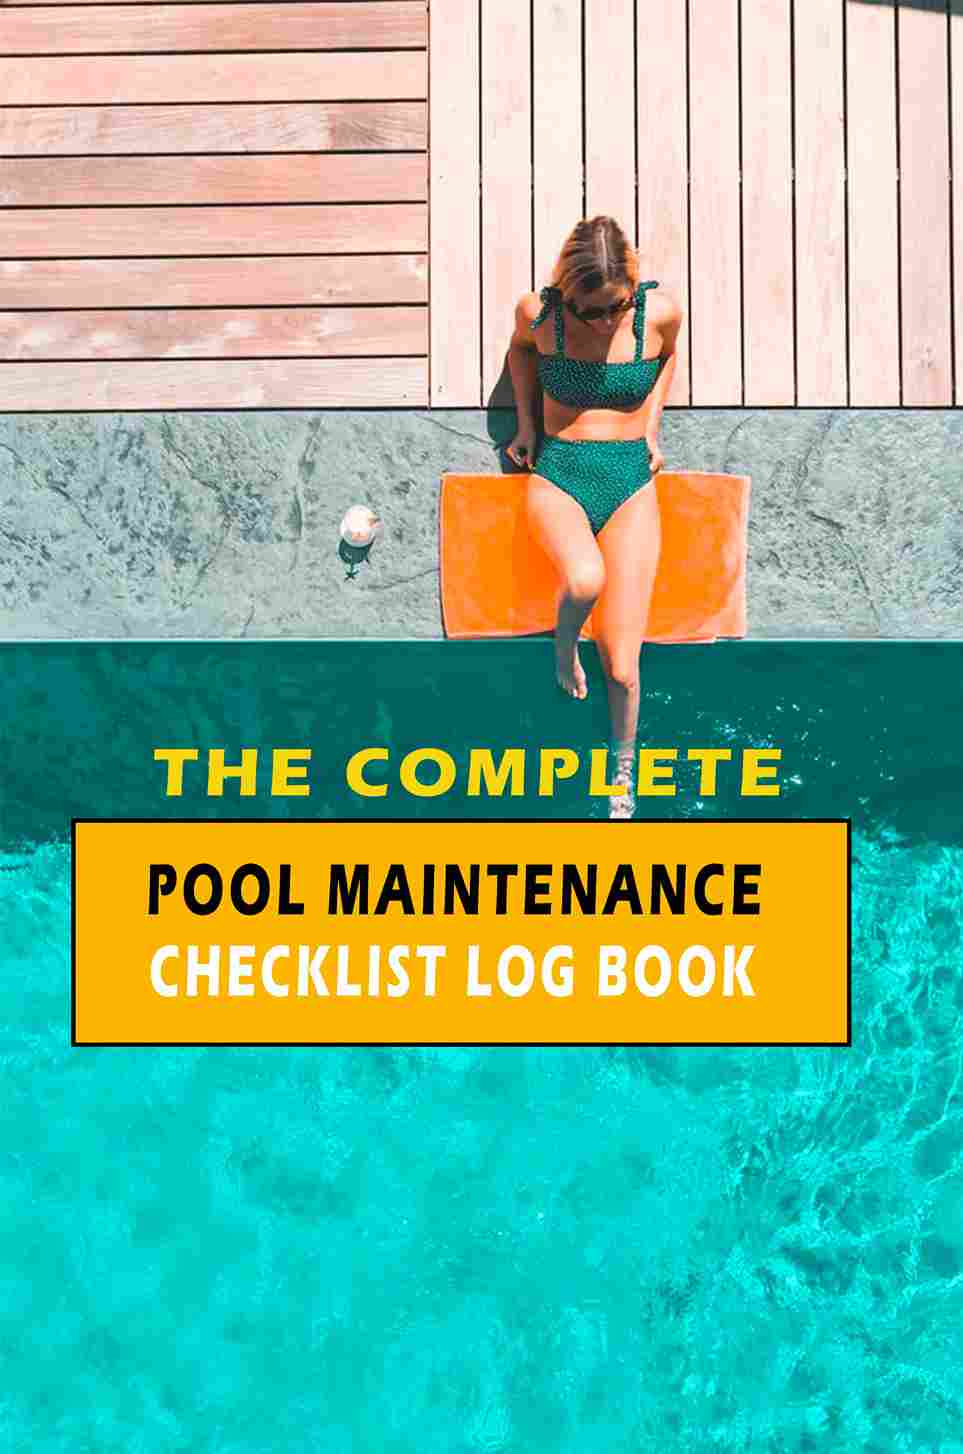 The Complete Pool Maintenance Checklist Log Book